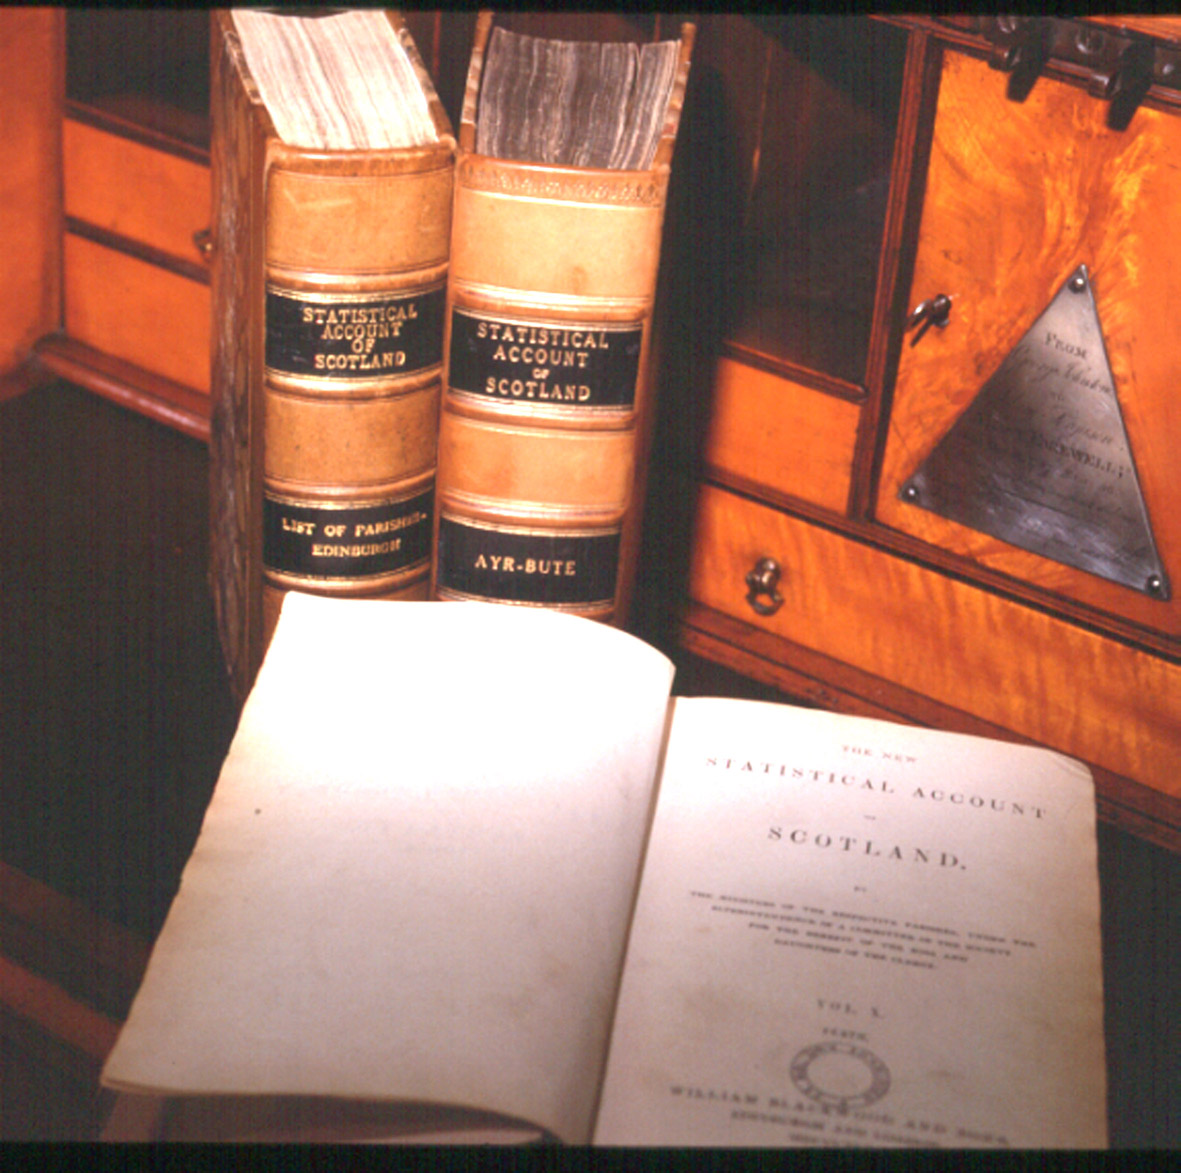 Image of Volumes from the Statistical Accounts of Scotland